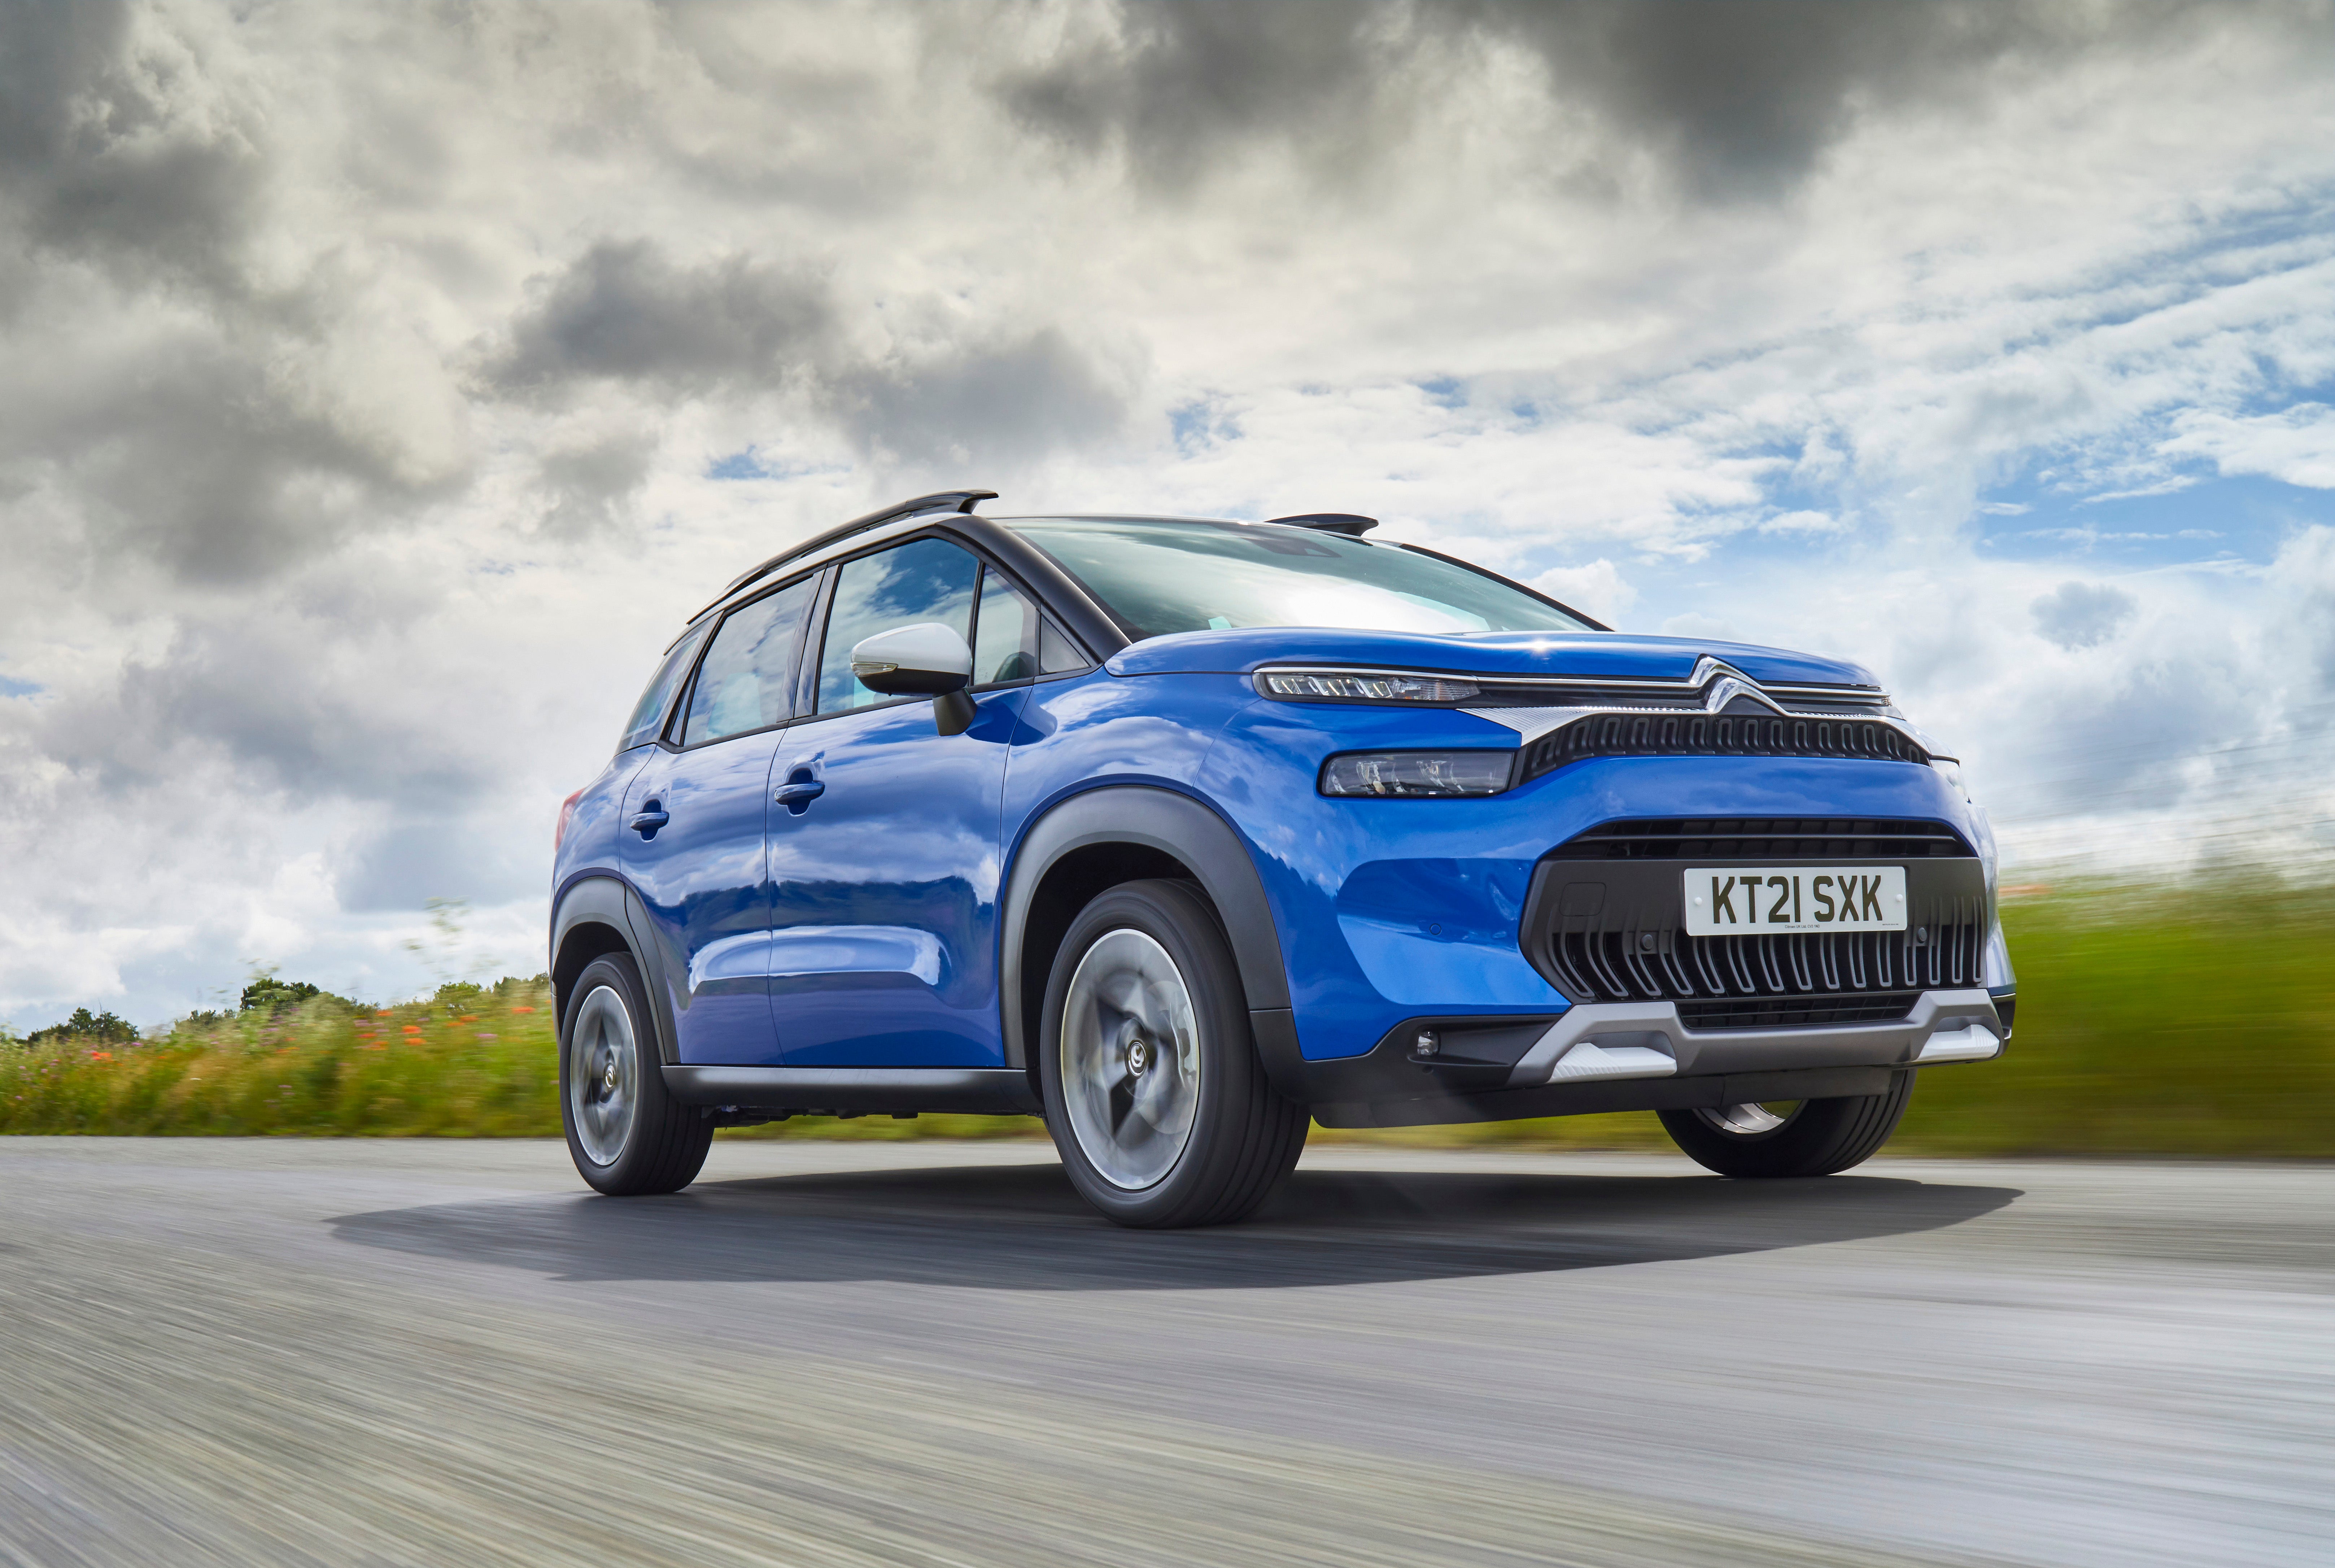 Citroen’s baby SUV looks a bit less Fisher Price these days